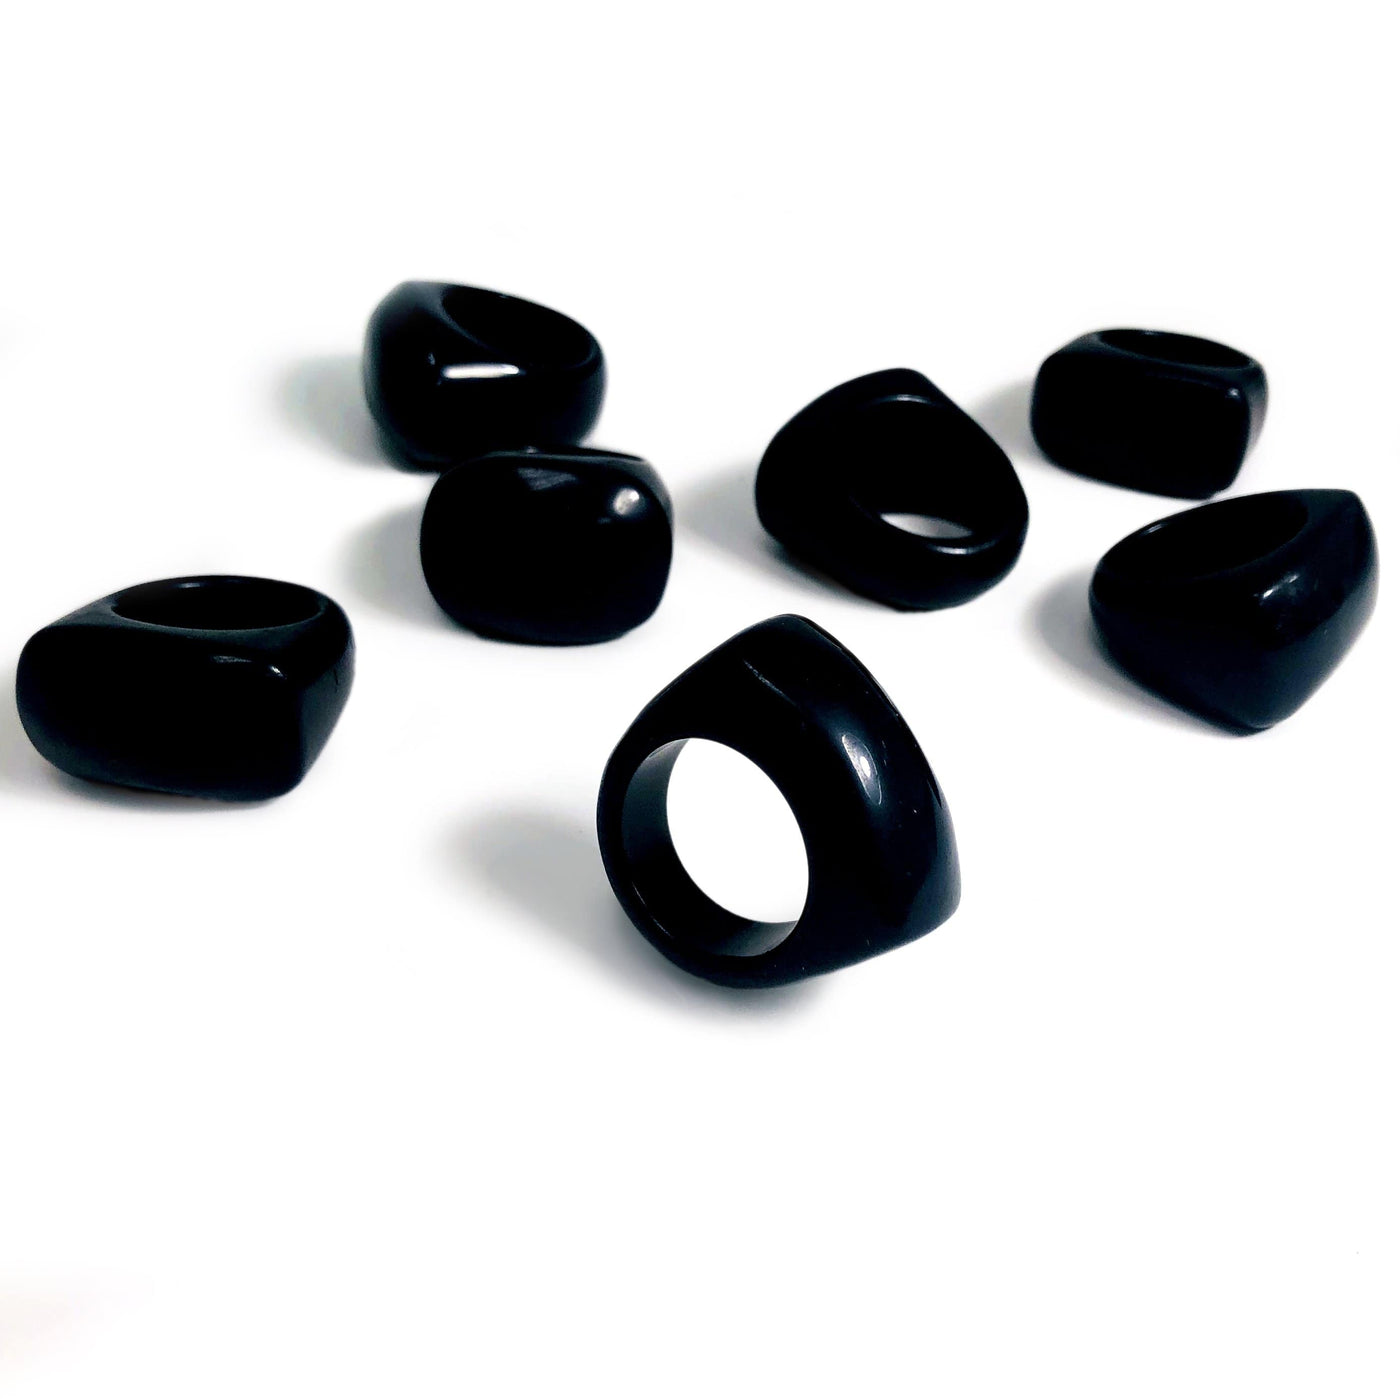 black obsidian rings on a white background.